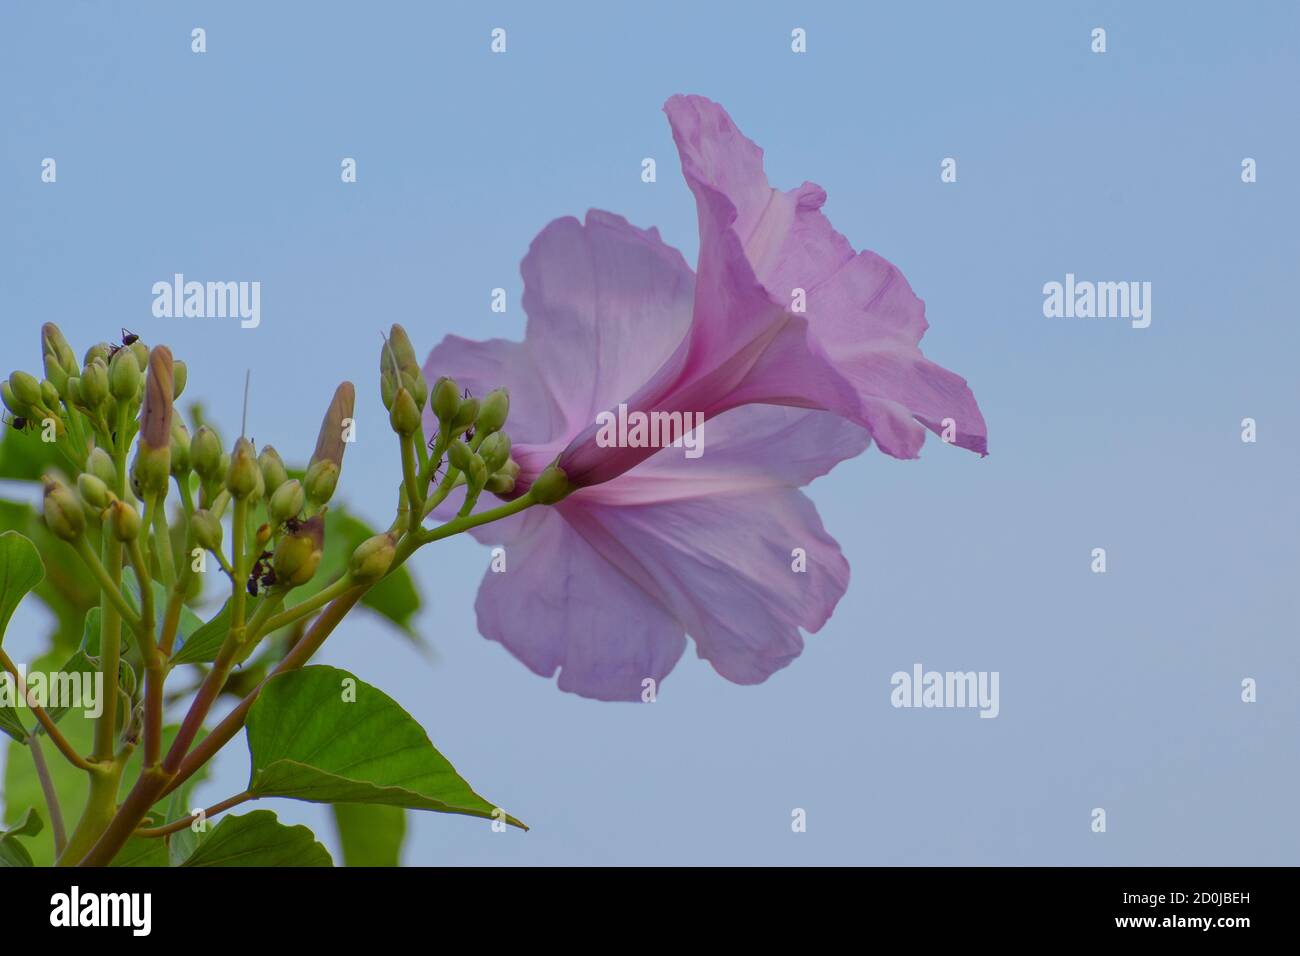 Beautiful fresh pink morning glory (ipomoea carnea) plant with flower blossoms and buds in the blue sky background, medicinal plant Stock Photo